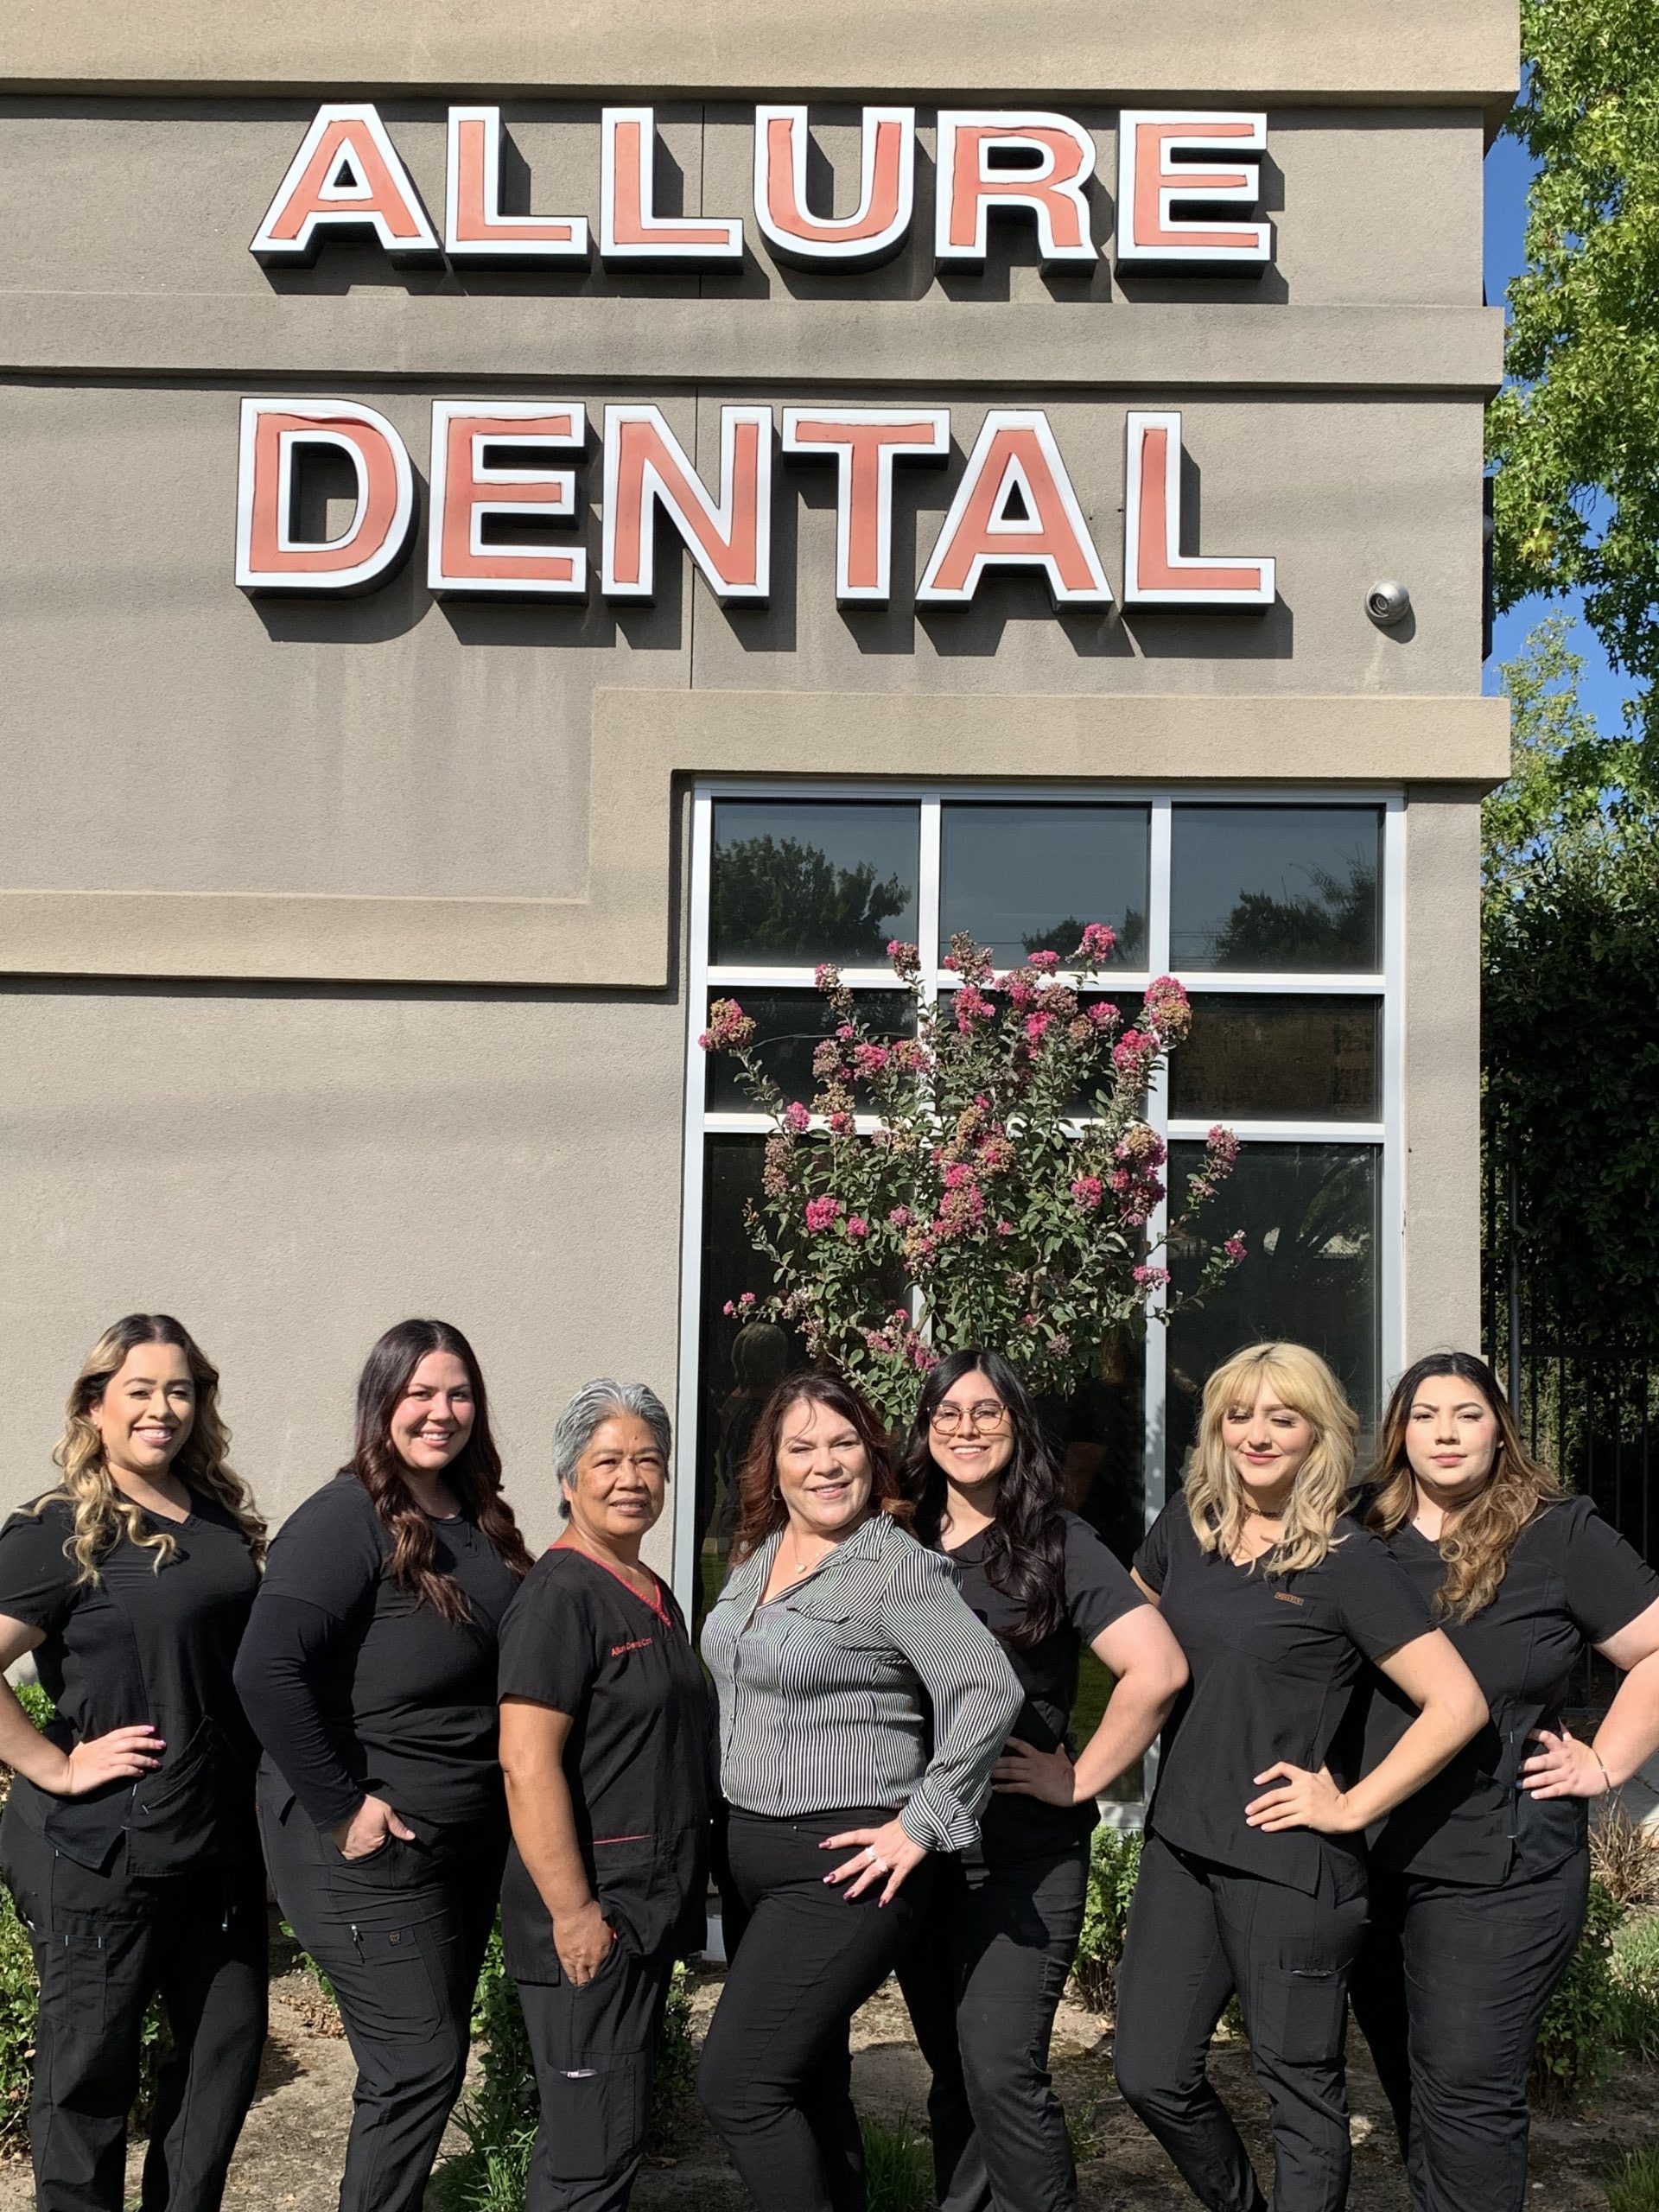 Our Dental Office in Modesto, CA